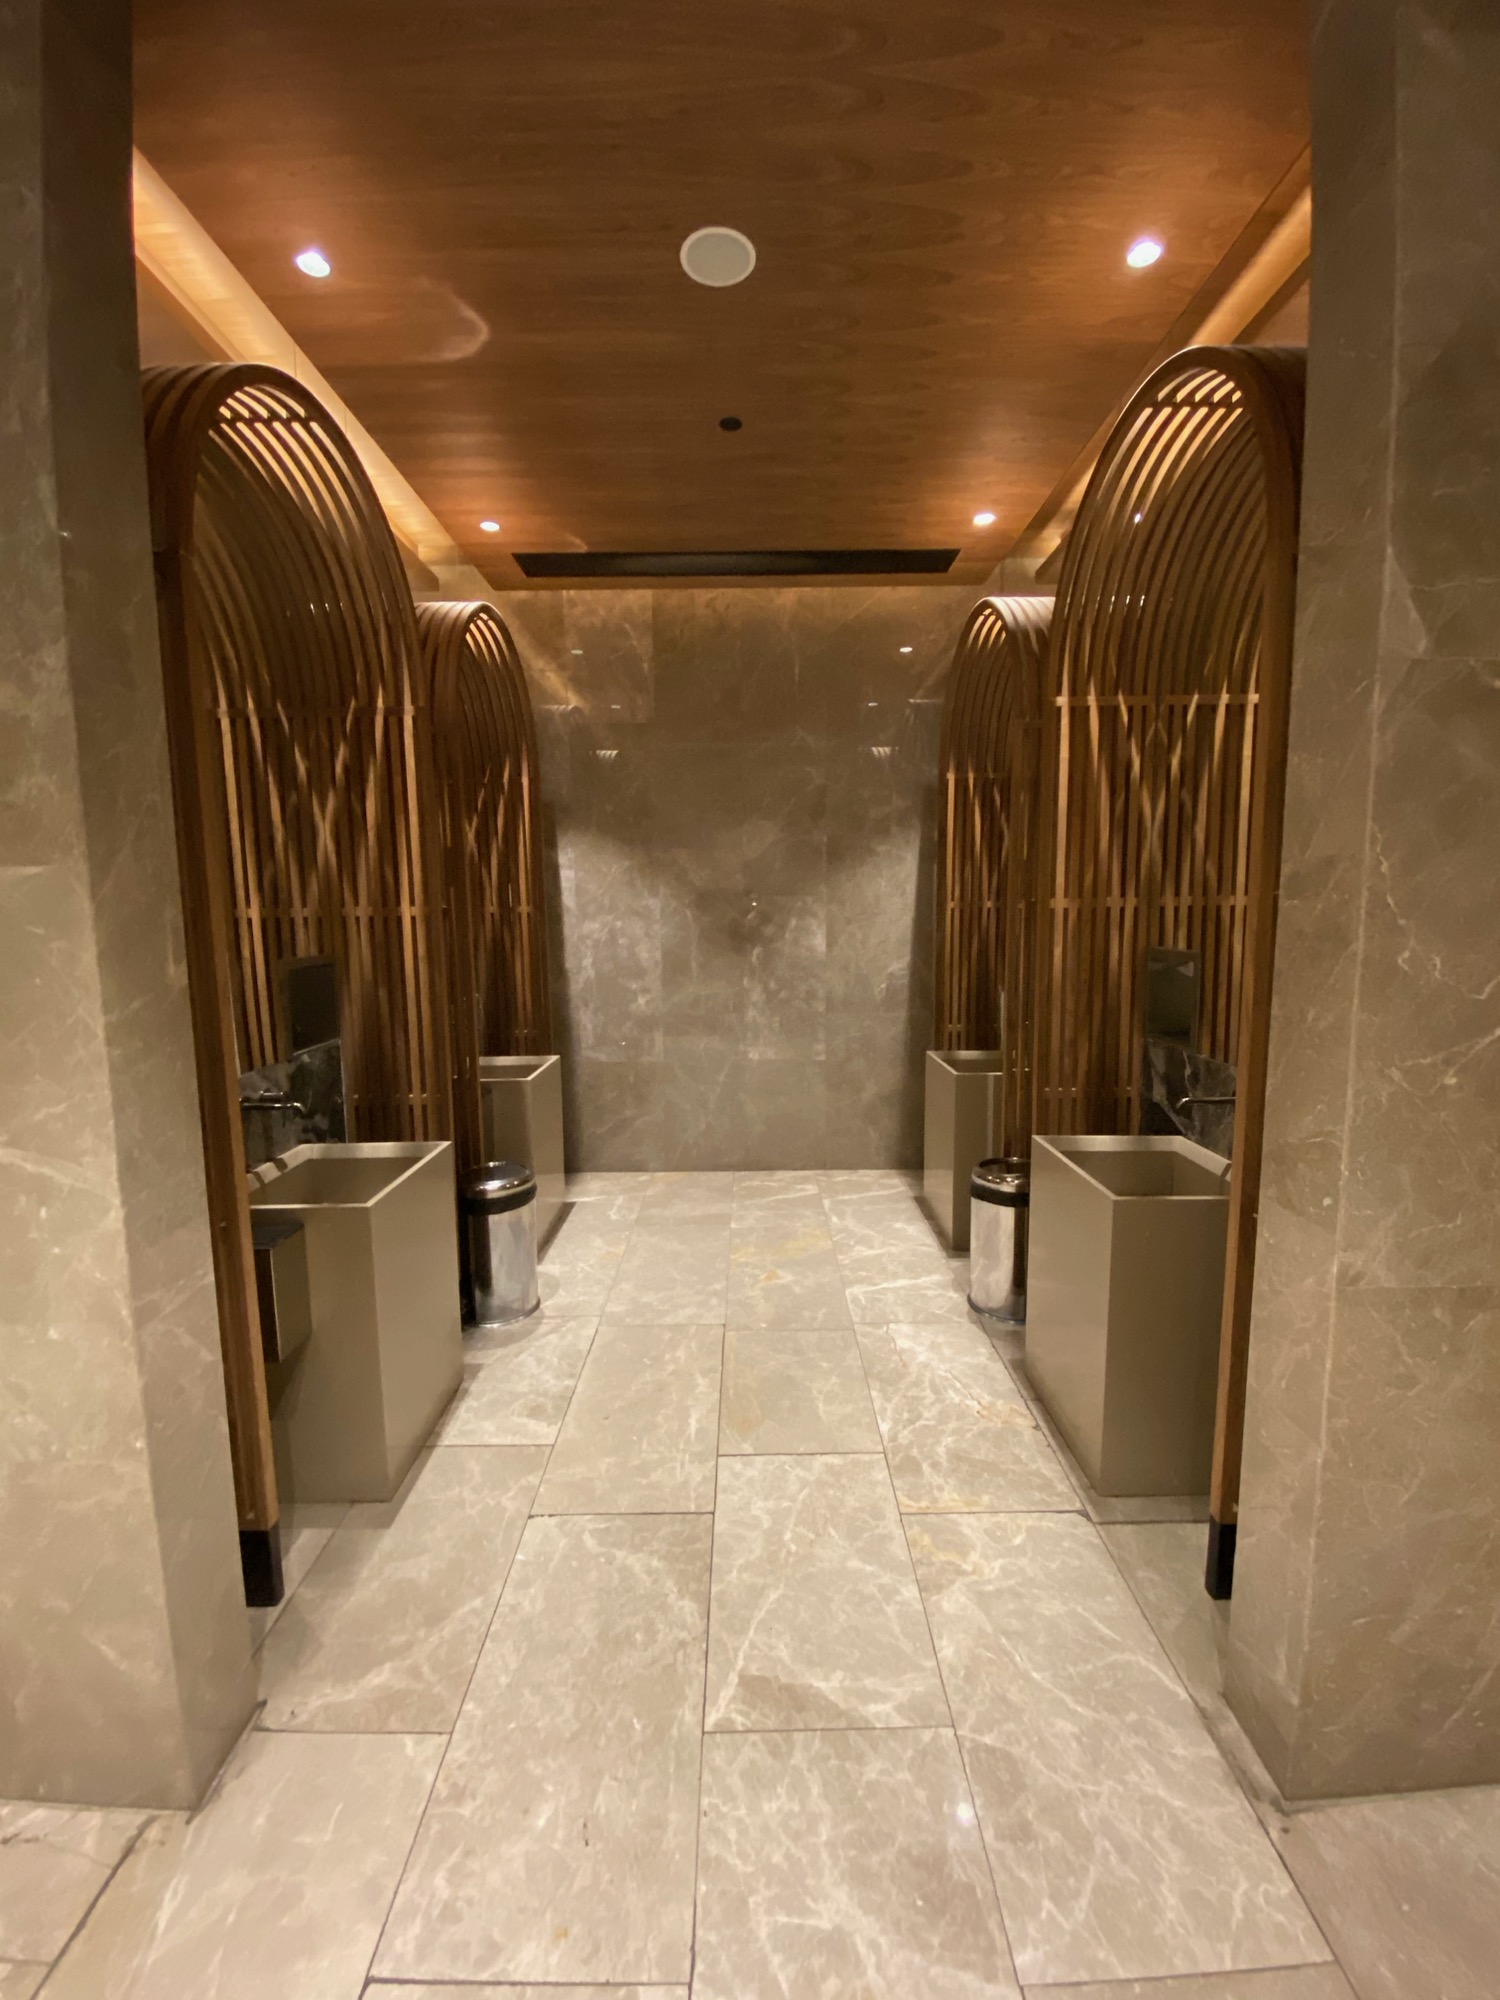 a bathroom with urinals and urinals